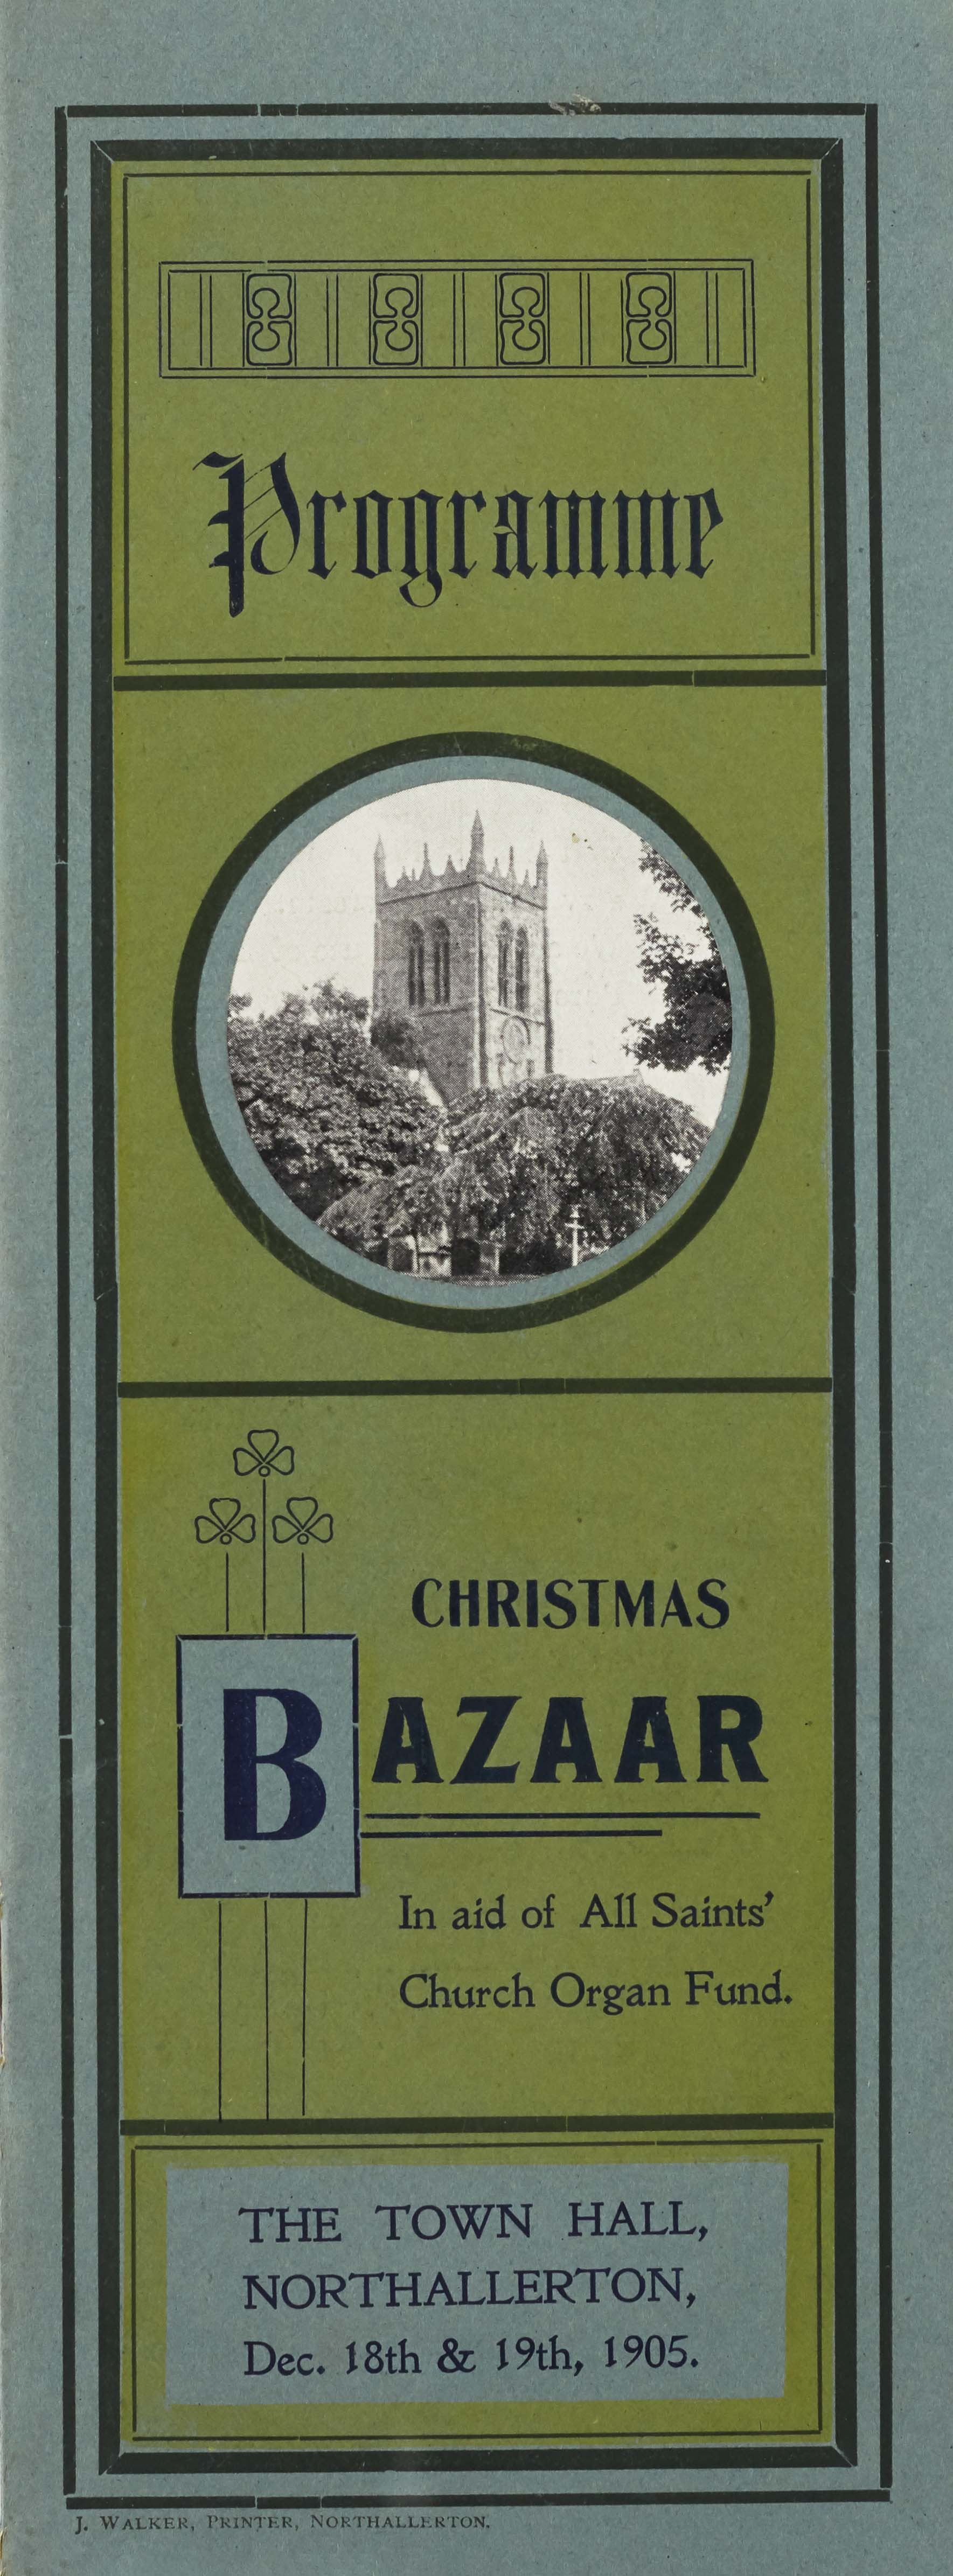 A programme from 1905 for a Christmas bazaar in aid of the organ fund at All Saints' Church, Northallerton.